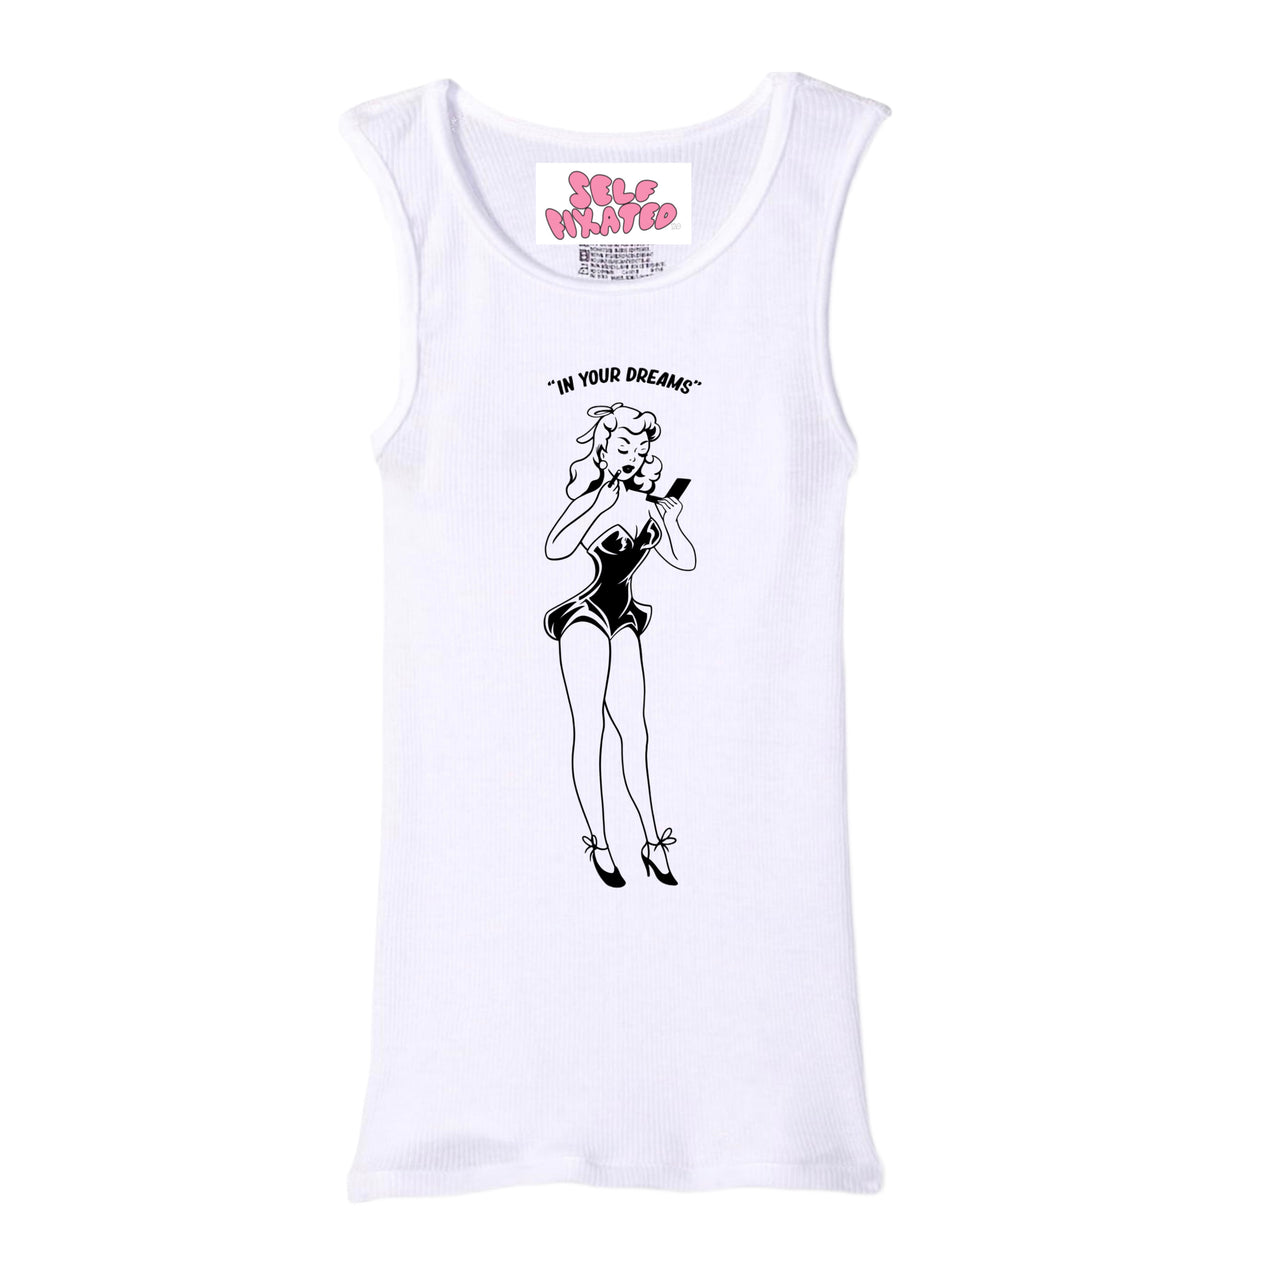 In your dreams pin up girl tank